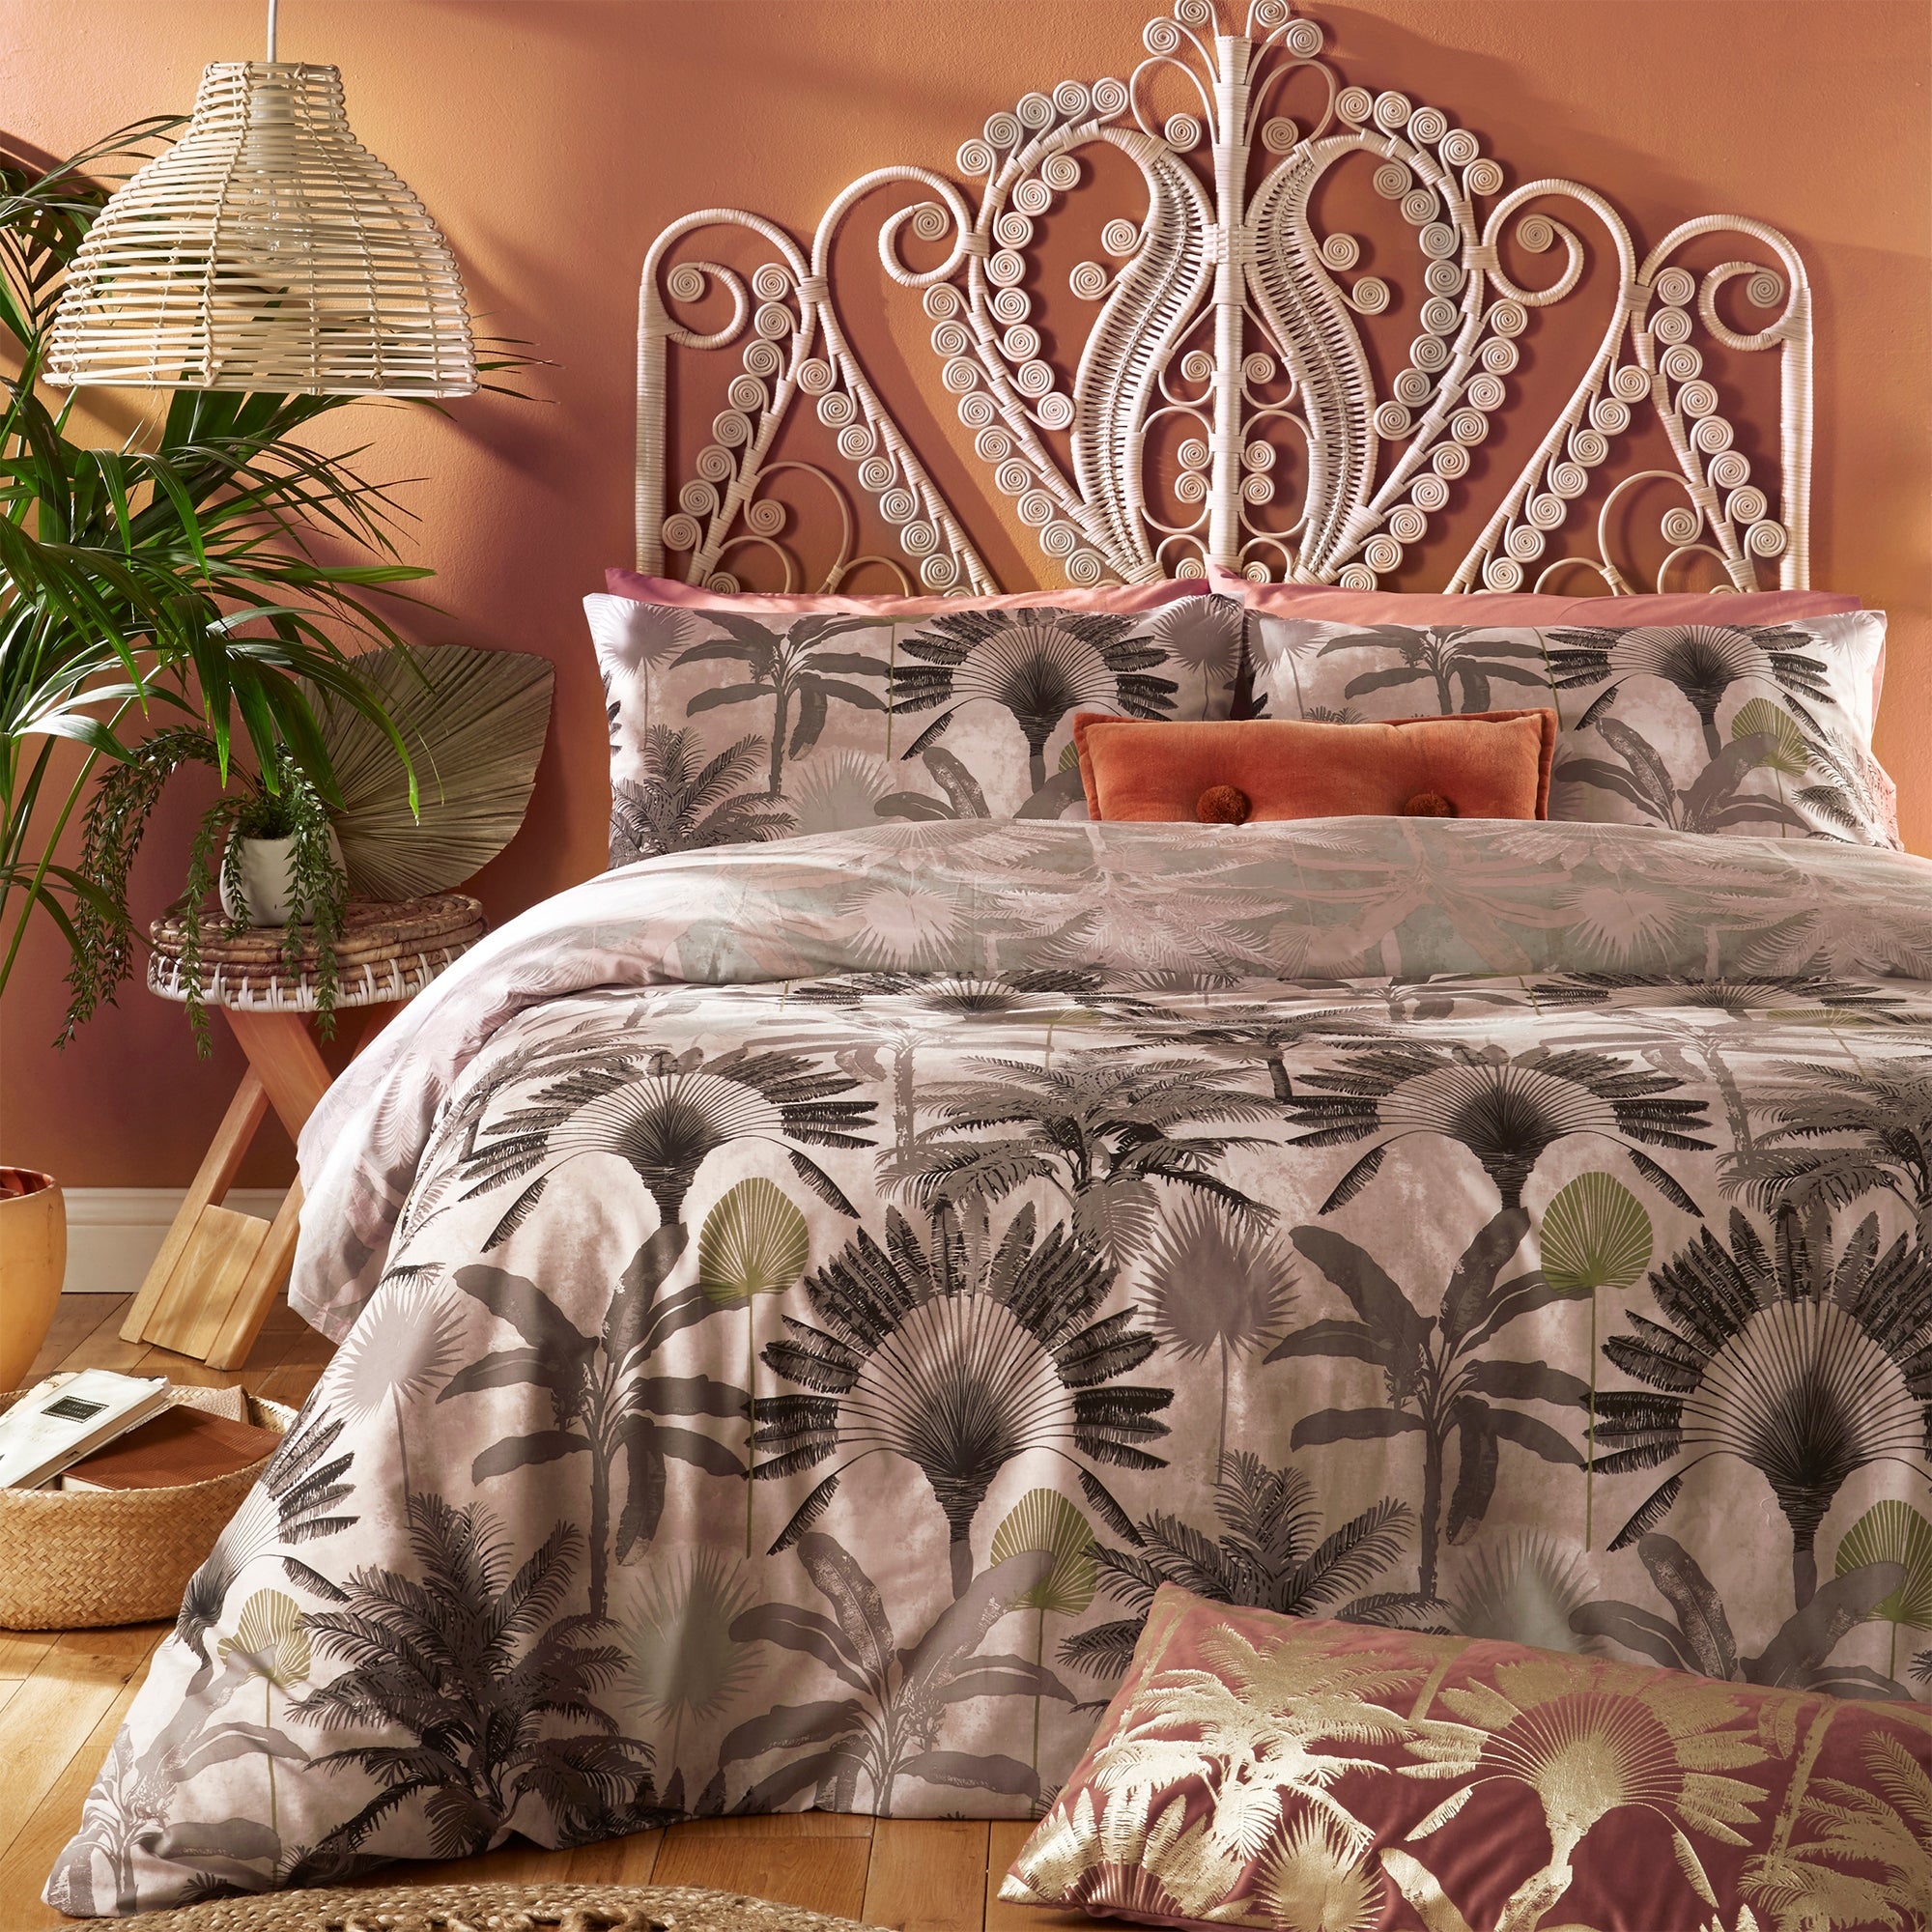 Furn Malaysian Palm Blush Floral Reversible Duvet Cover And Pillowcase Set Brown